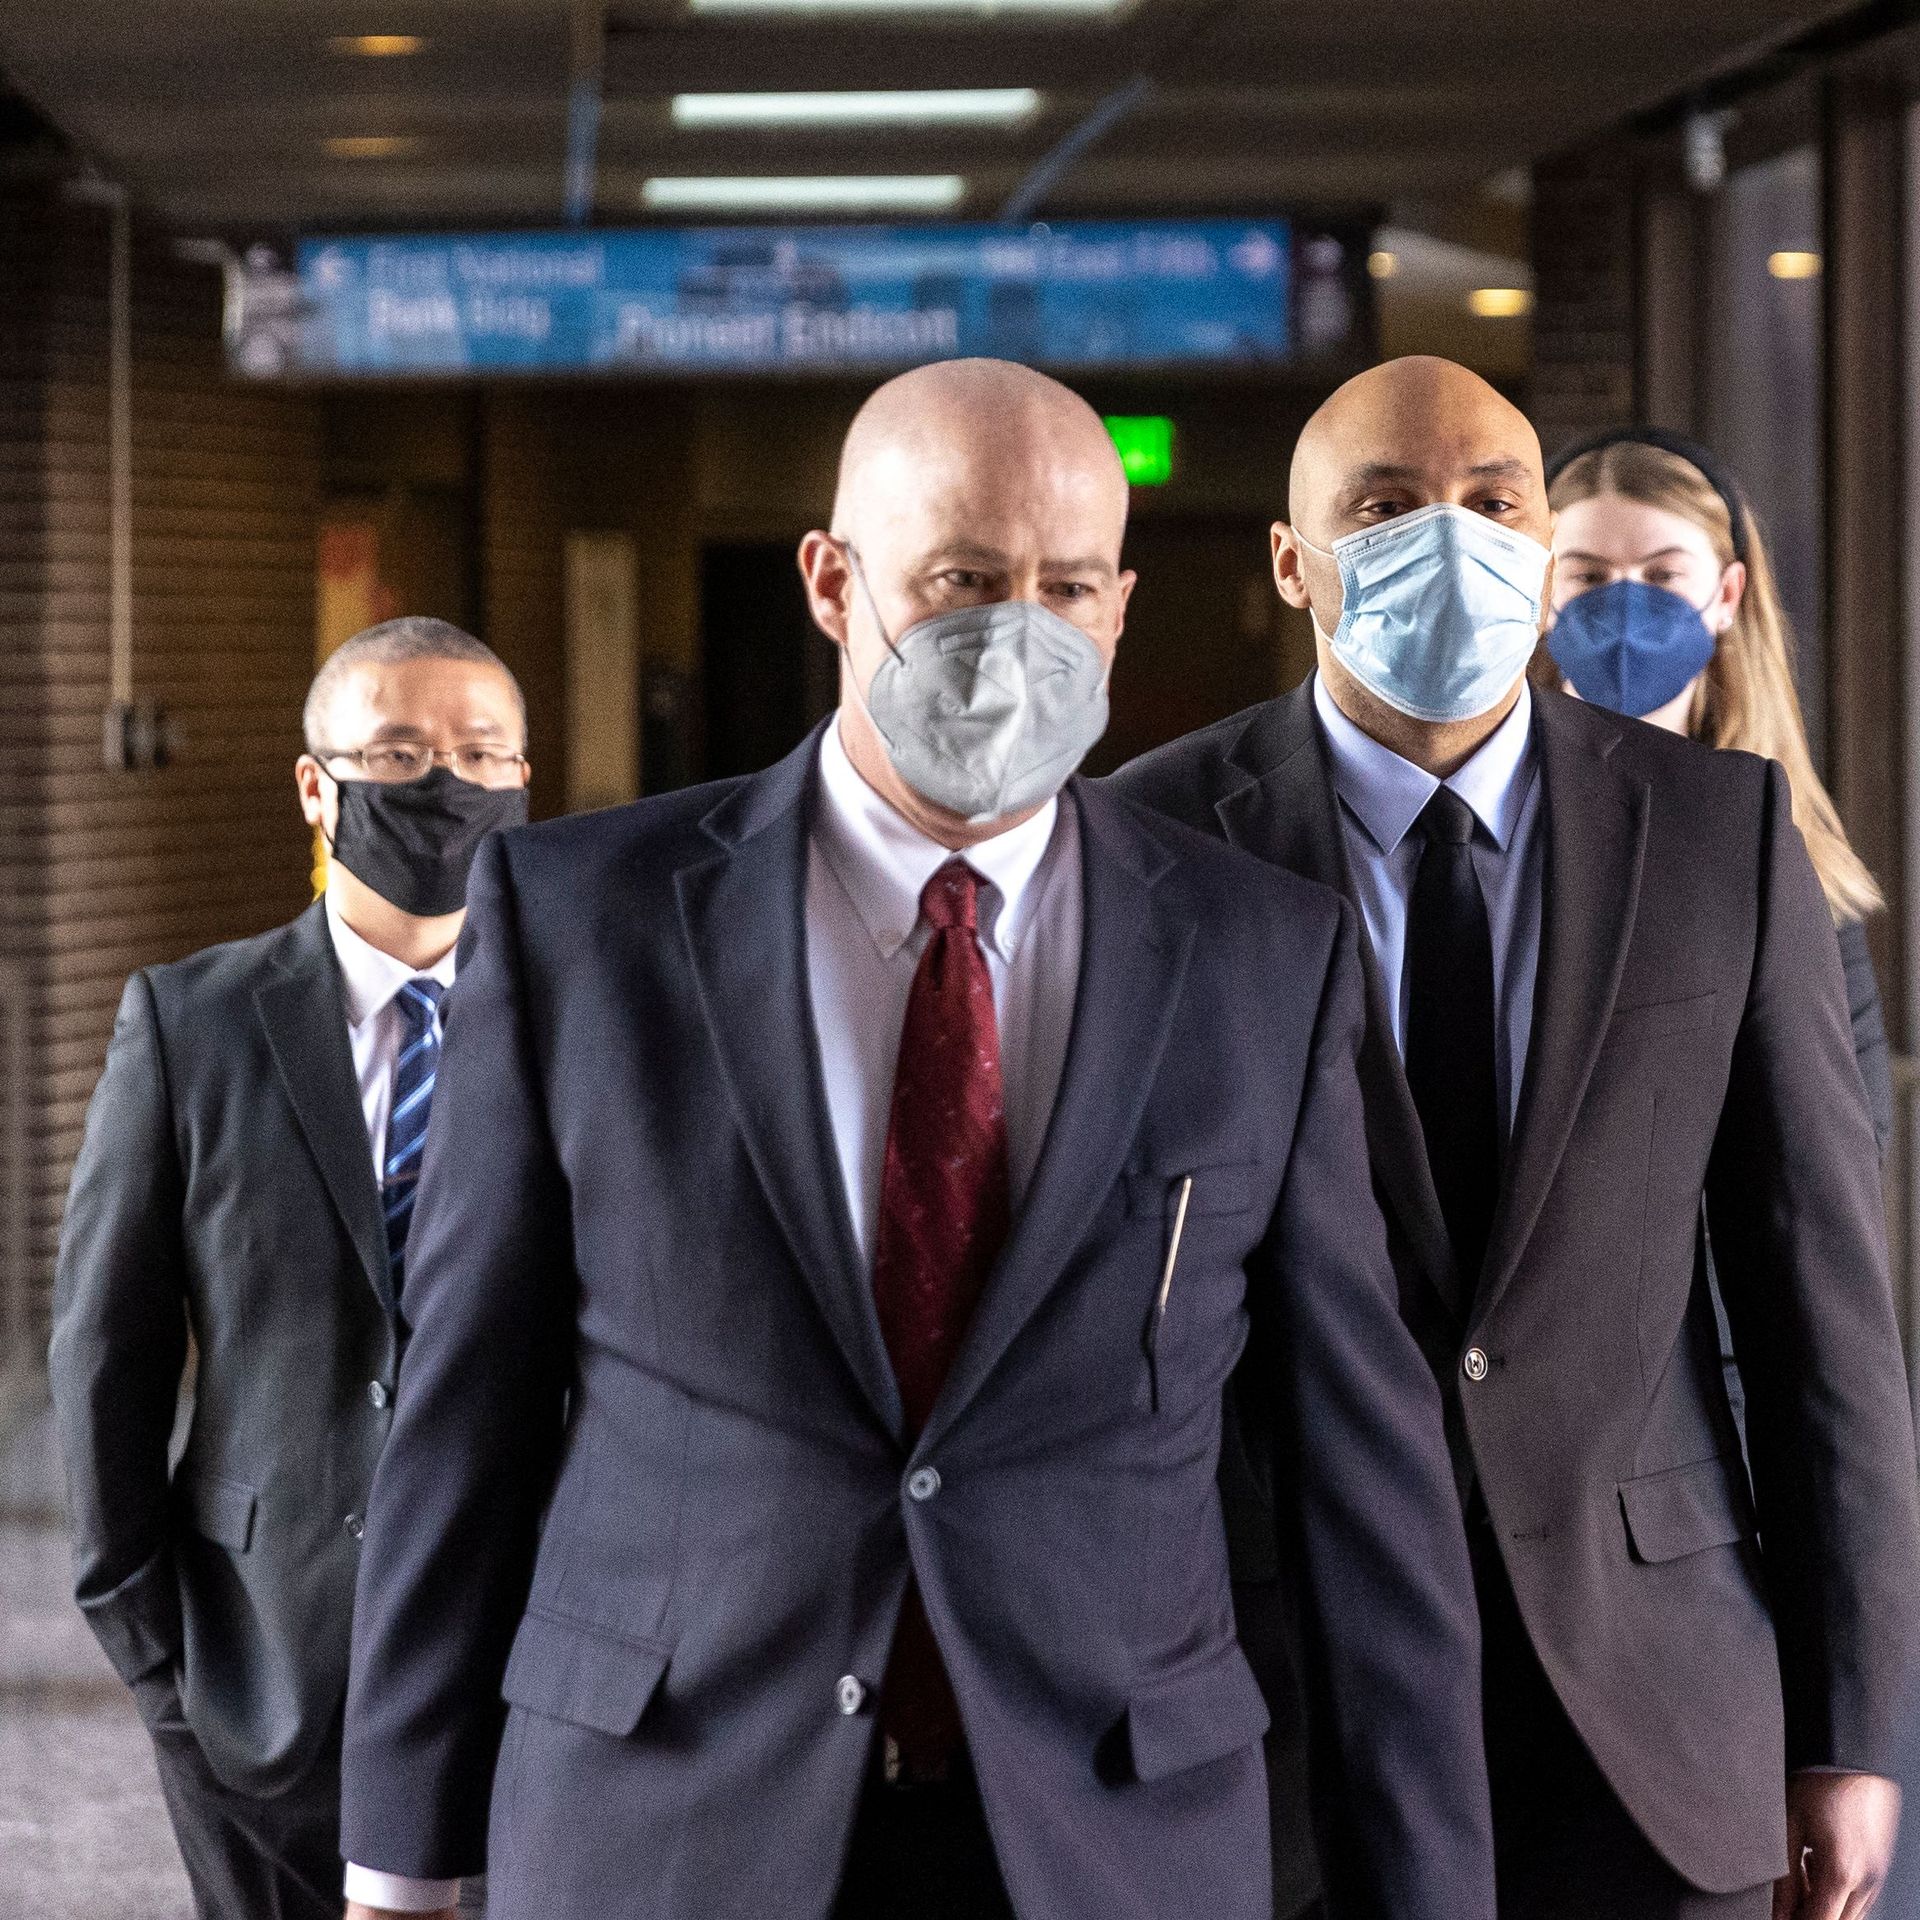 Photo of three masked men and a masked woman in the back walking down a hallway